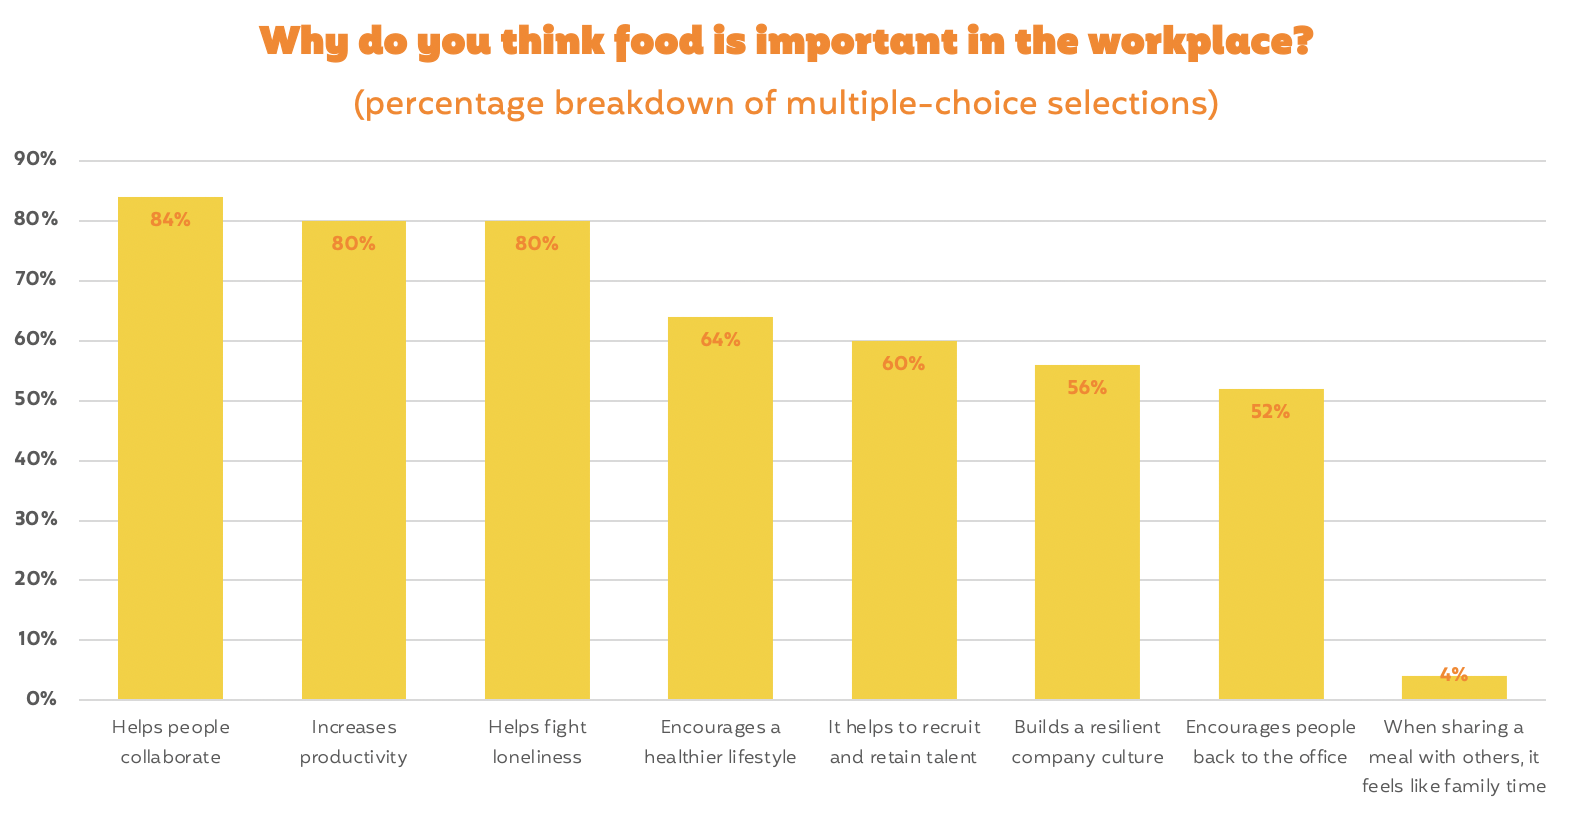  A graph showing the results of survey question: “Why do you think food is important in the workplace” 